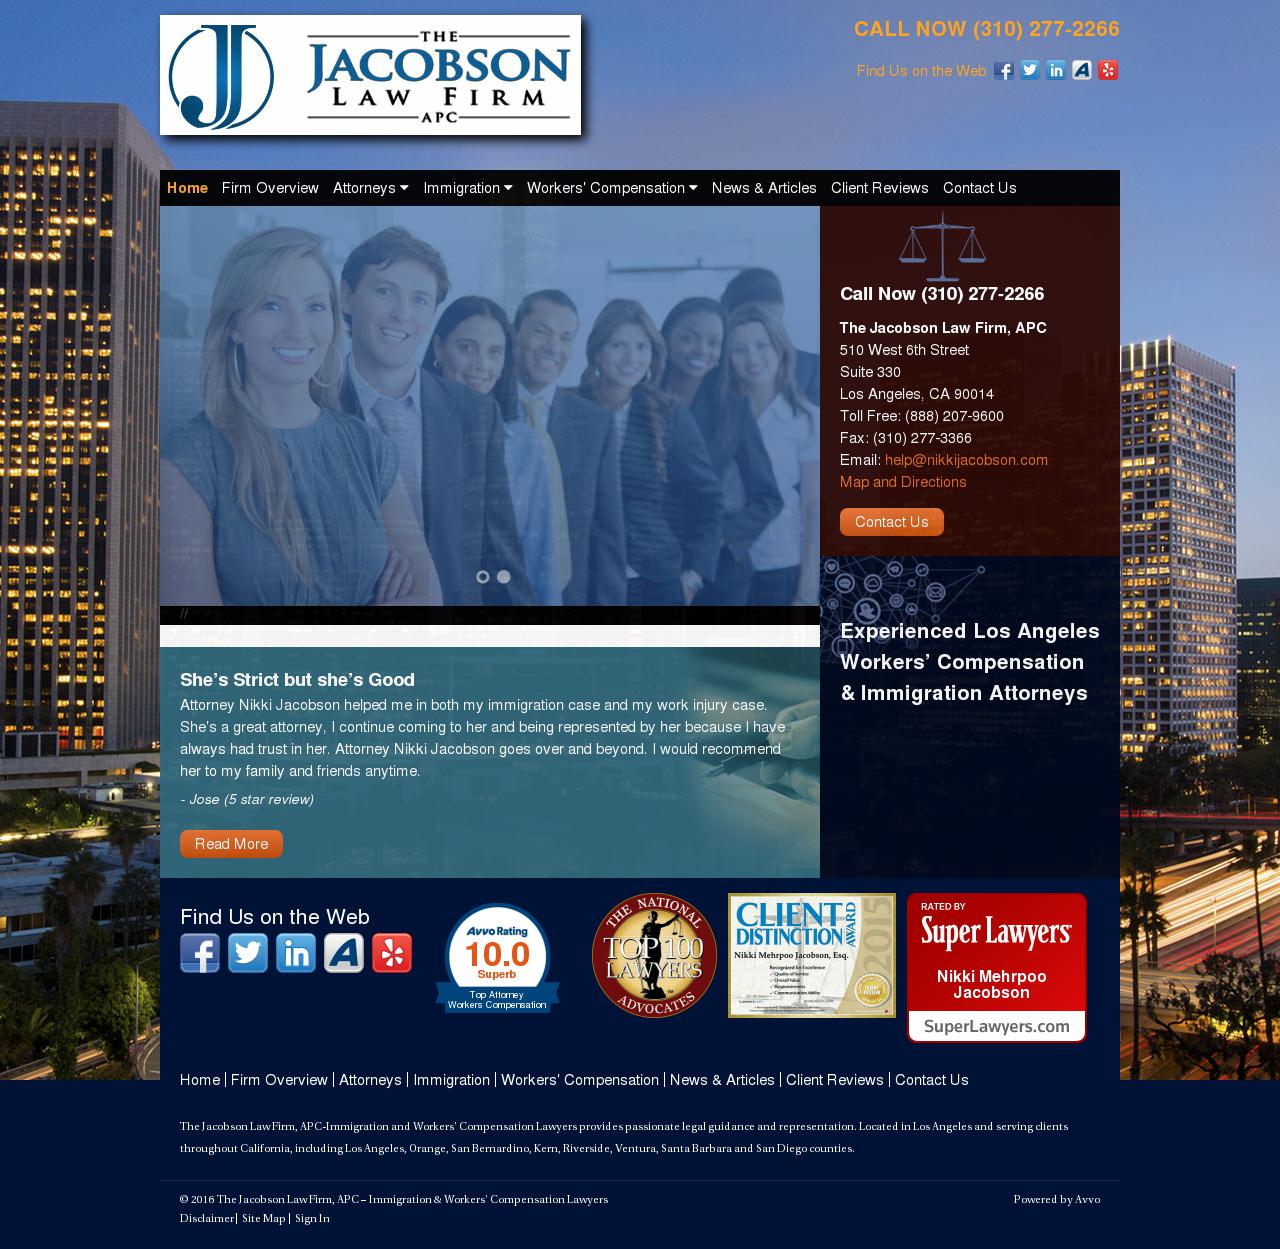 The Jacobson Law Firm APC - Los Angeles CA Lawyers